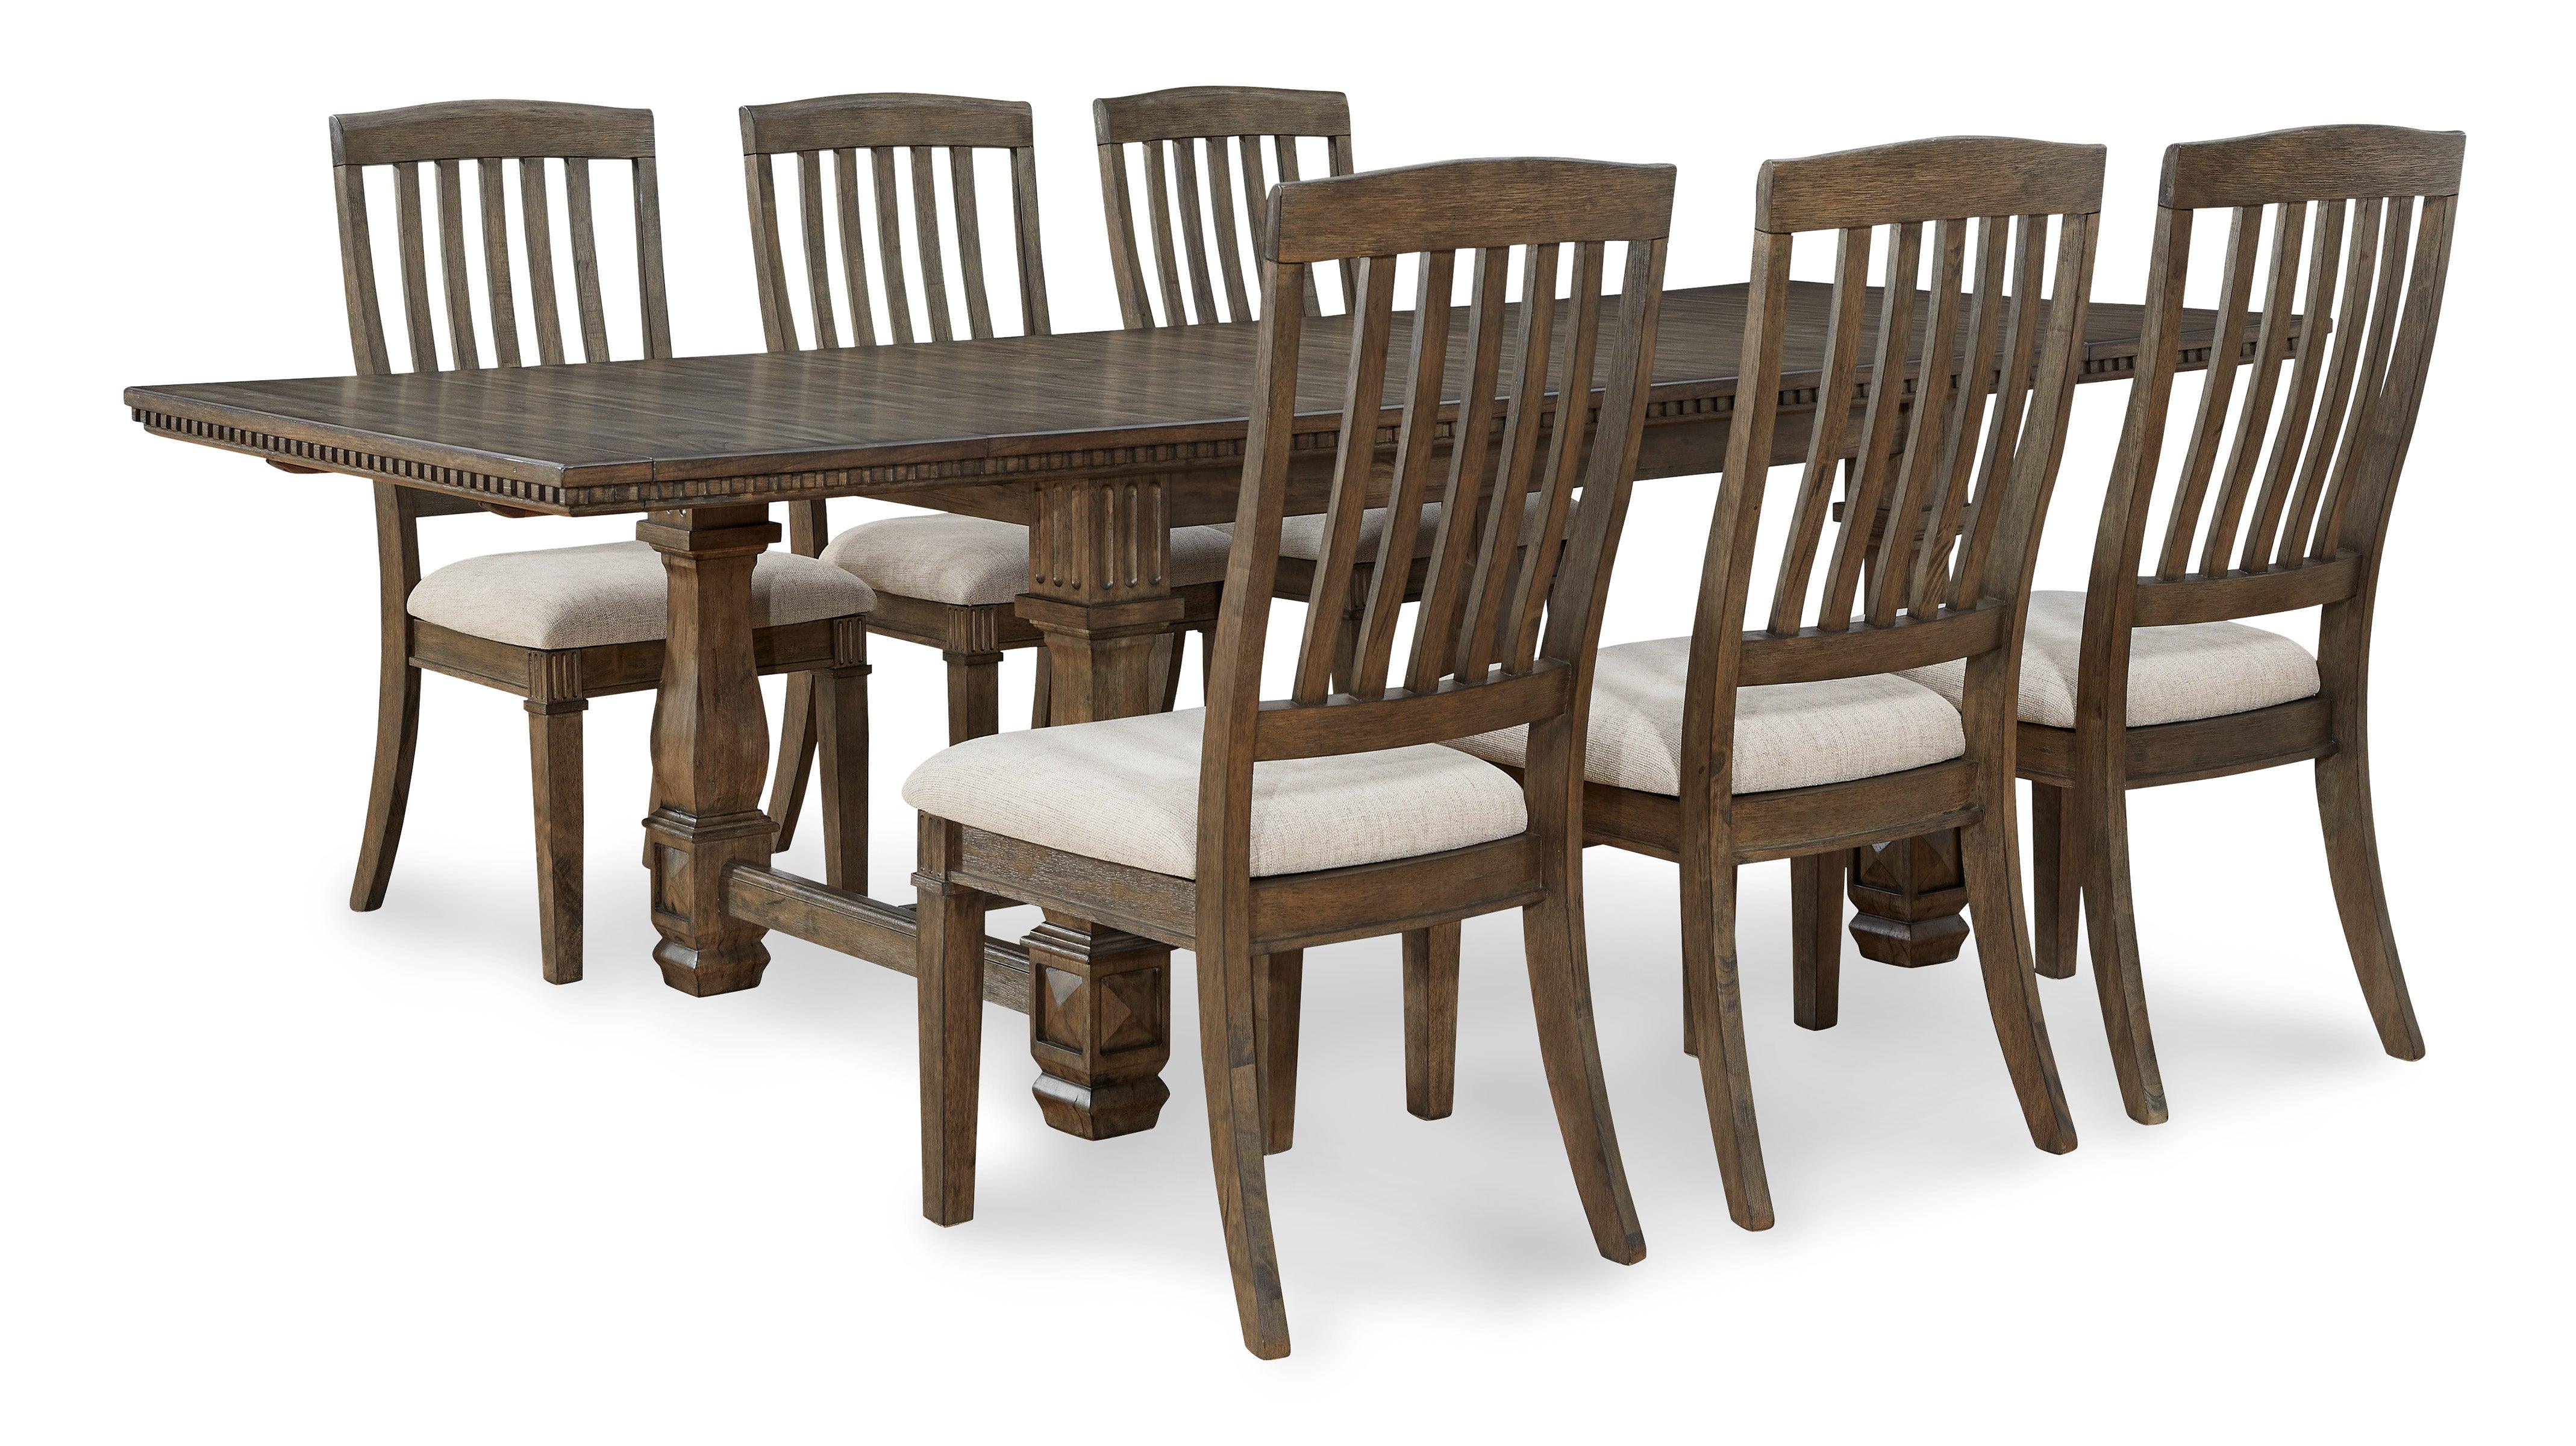 The Markenburg Dining Collection - Castle Furniture